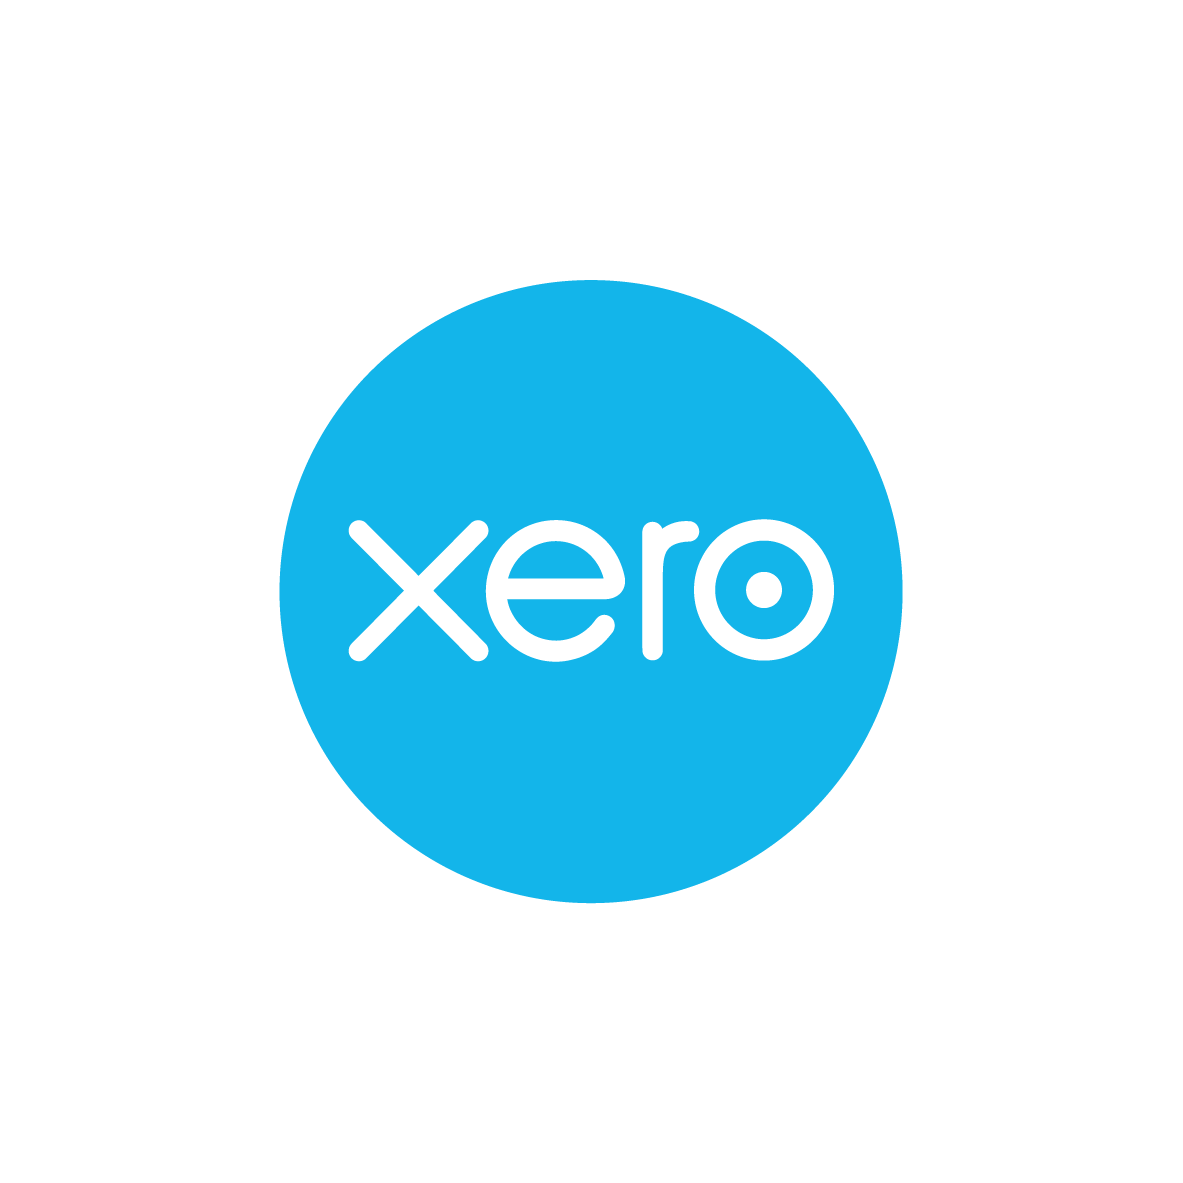 My Rigel Tax and Accounting Experts is Xero partner and Xero certified advisor